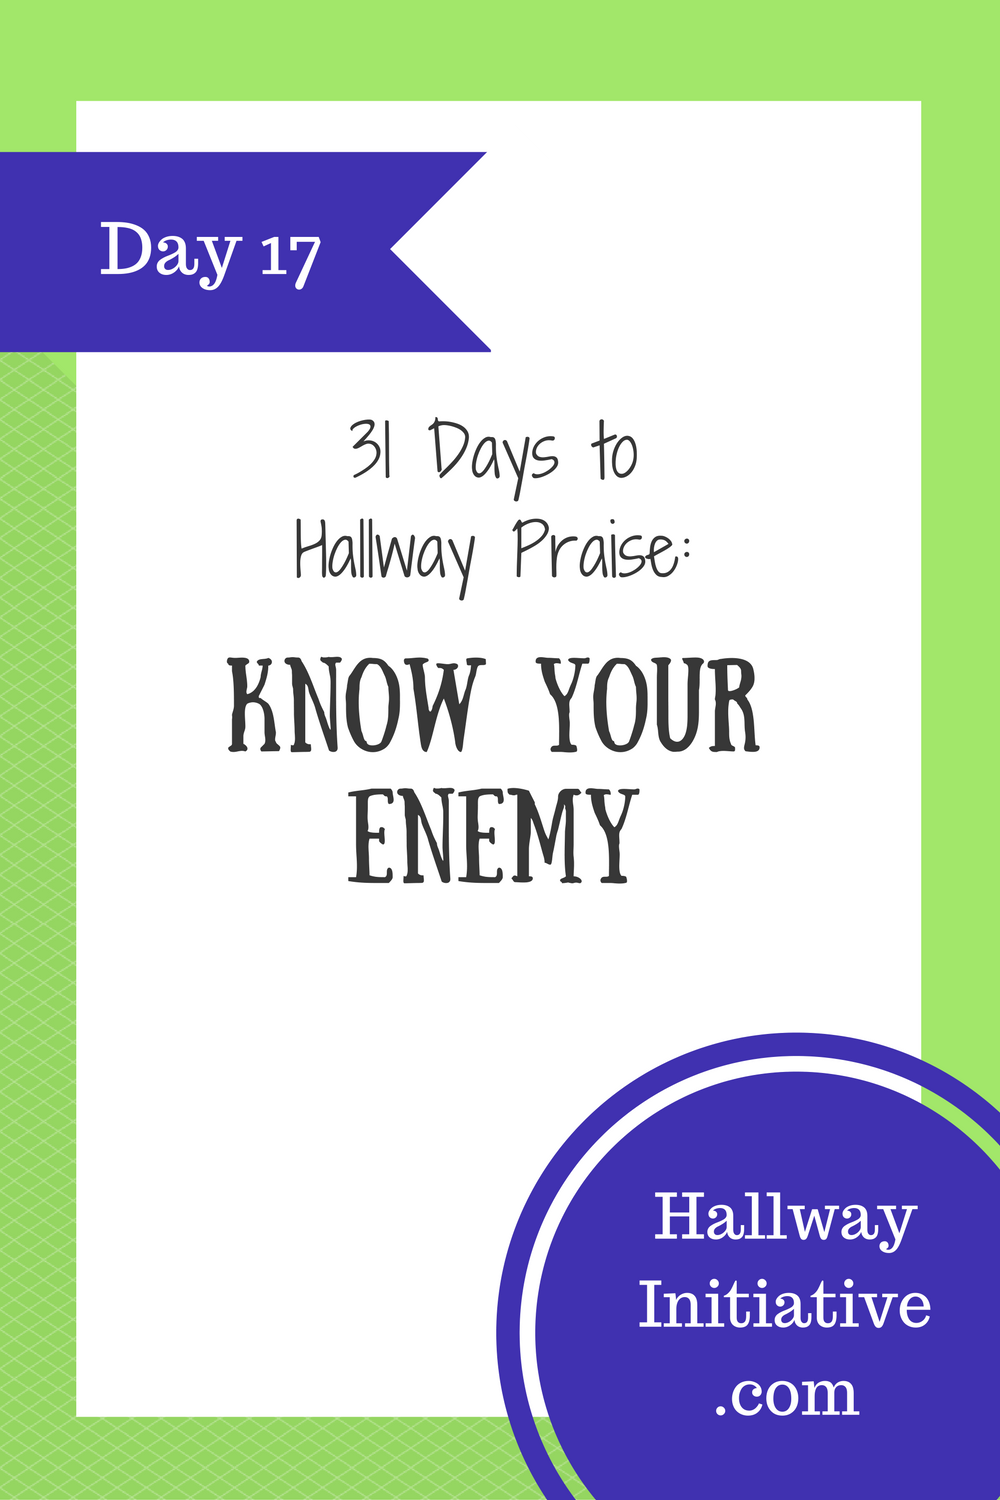 Day 17: know your enemy